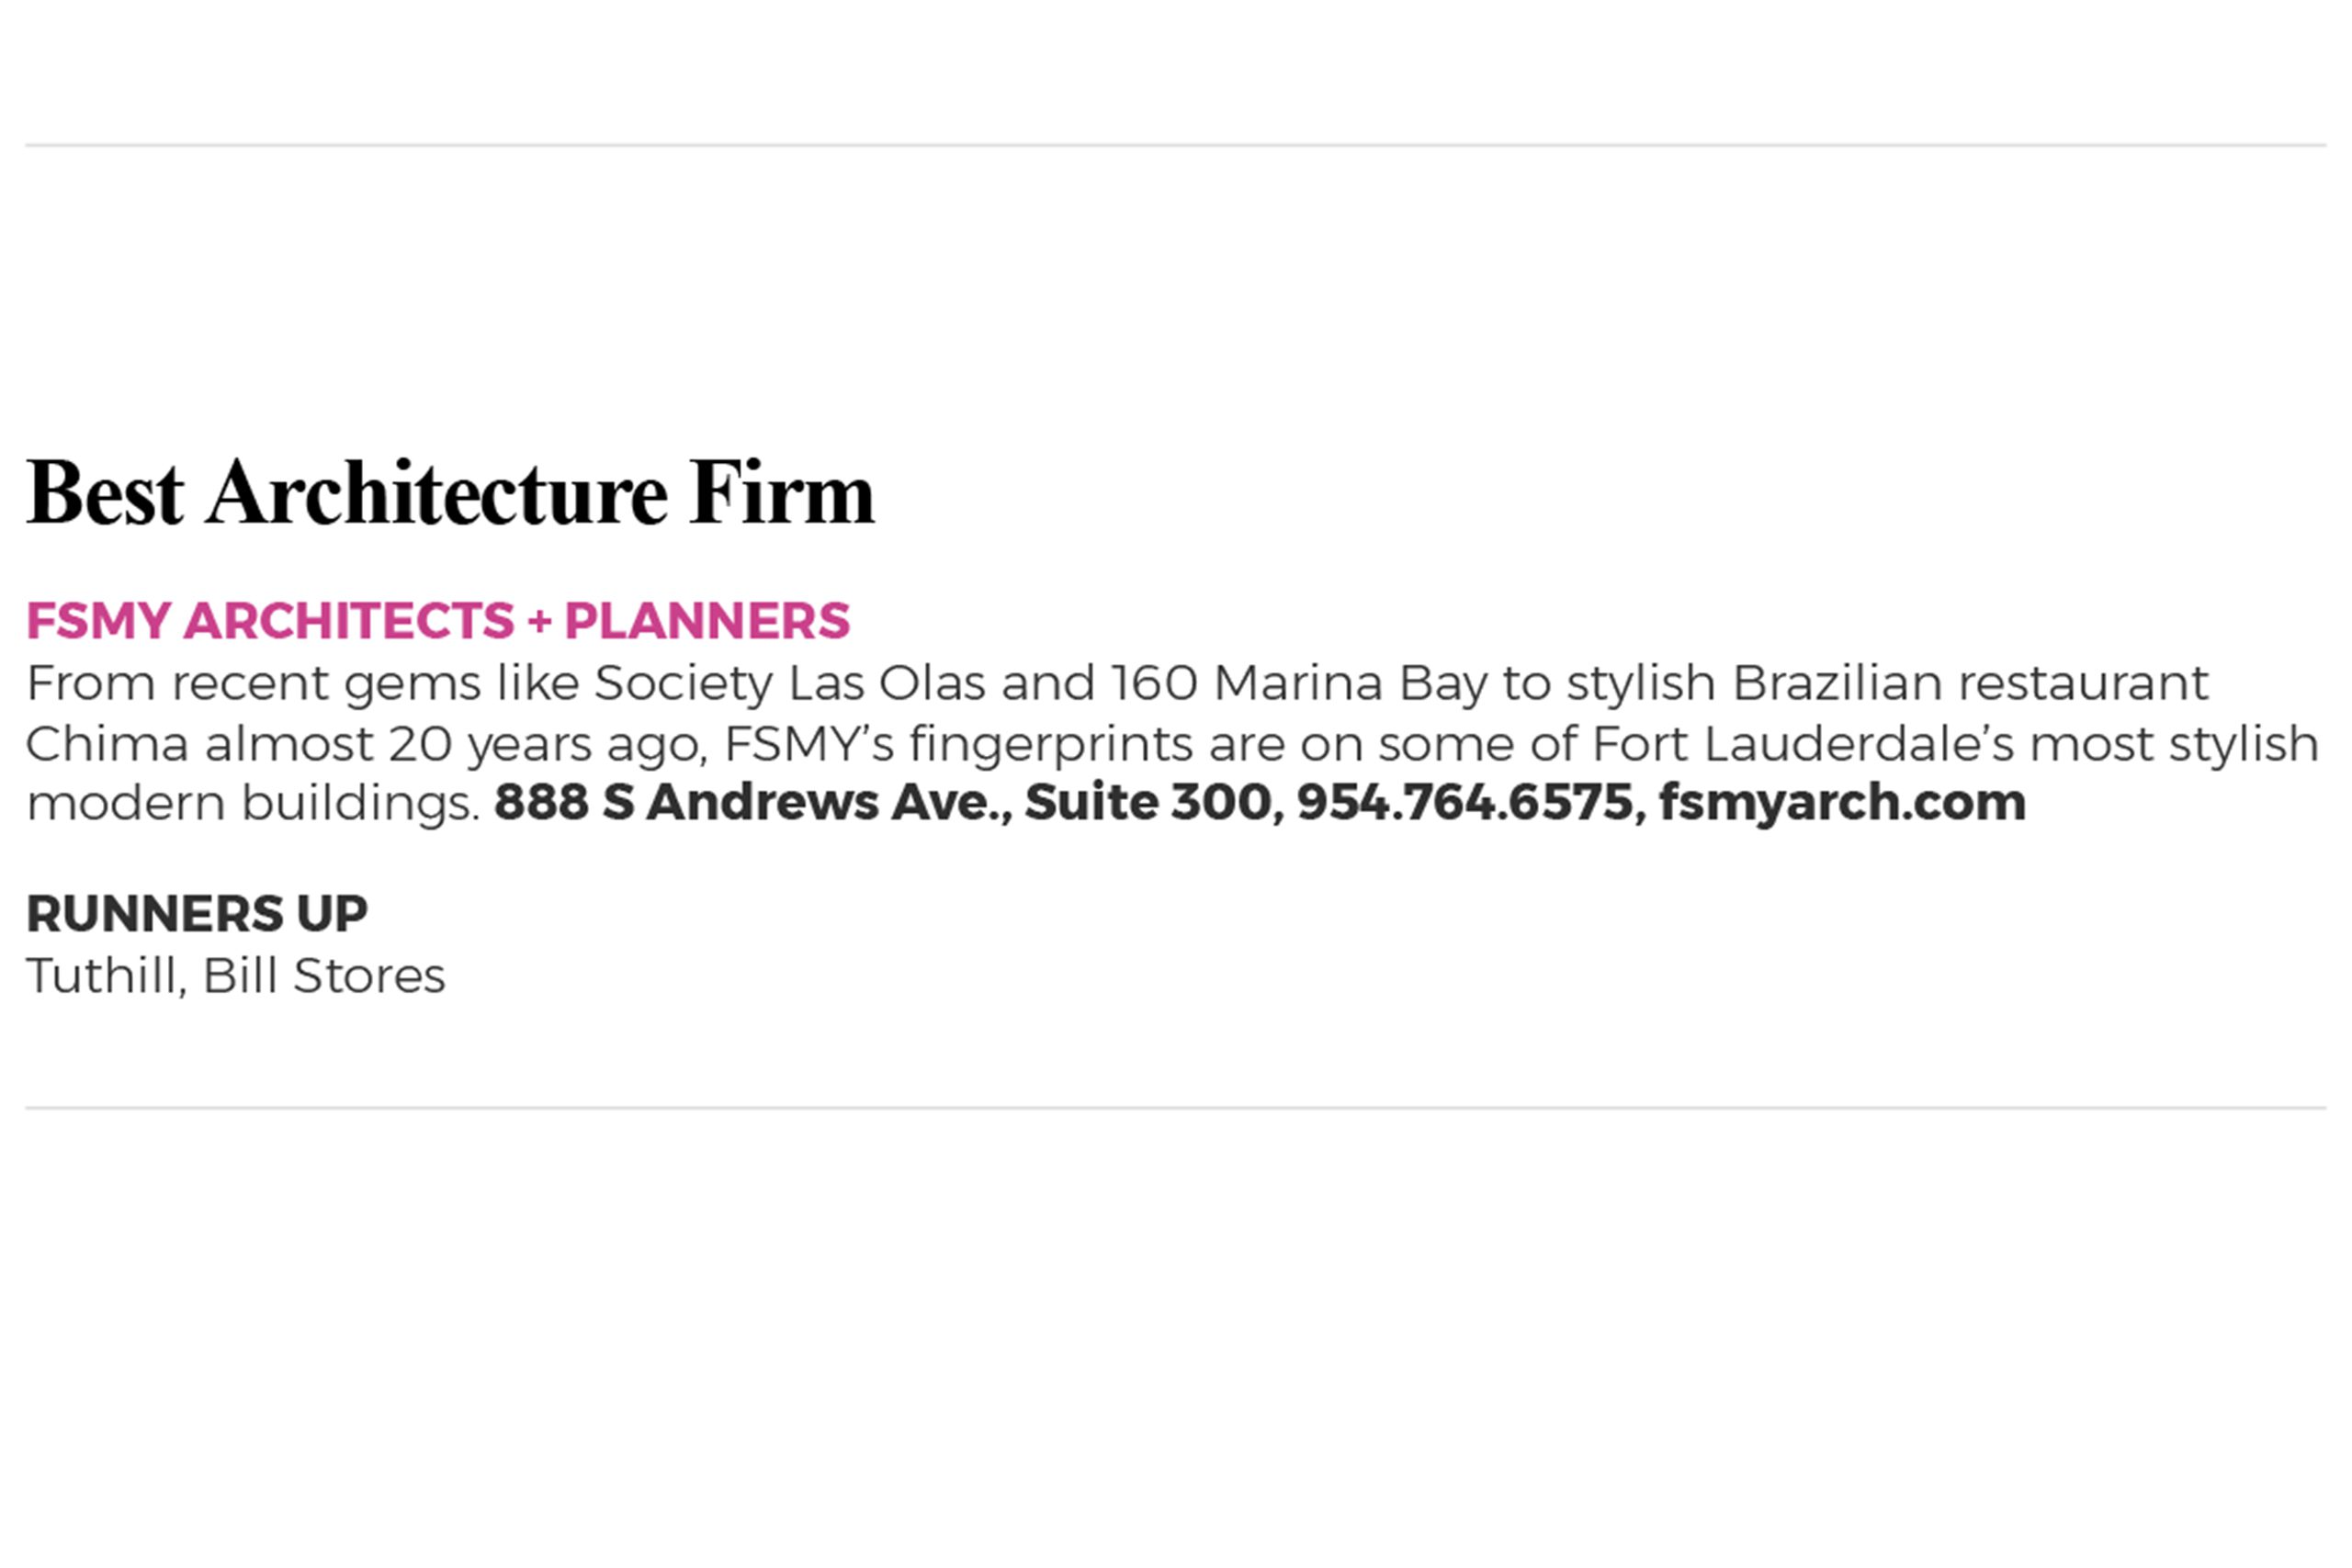 FSMY named “Best Architecture Firm” by Fort Lauderdale Magazine